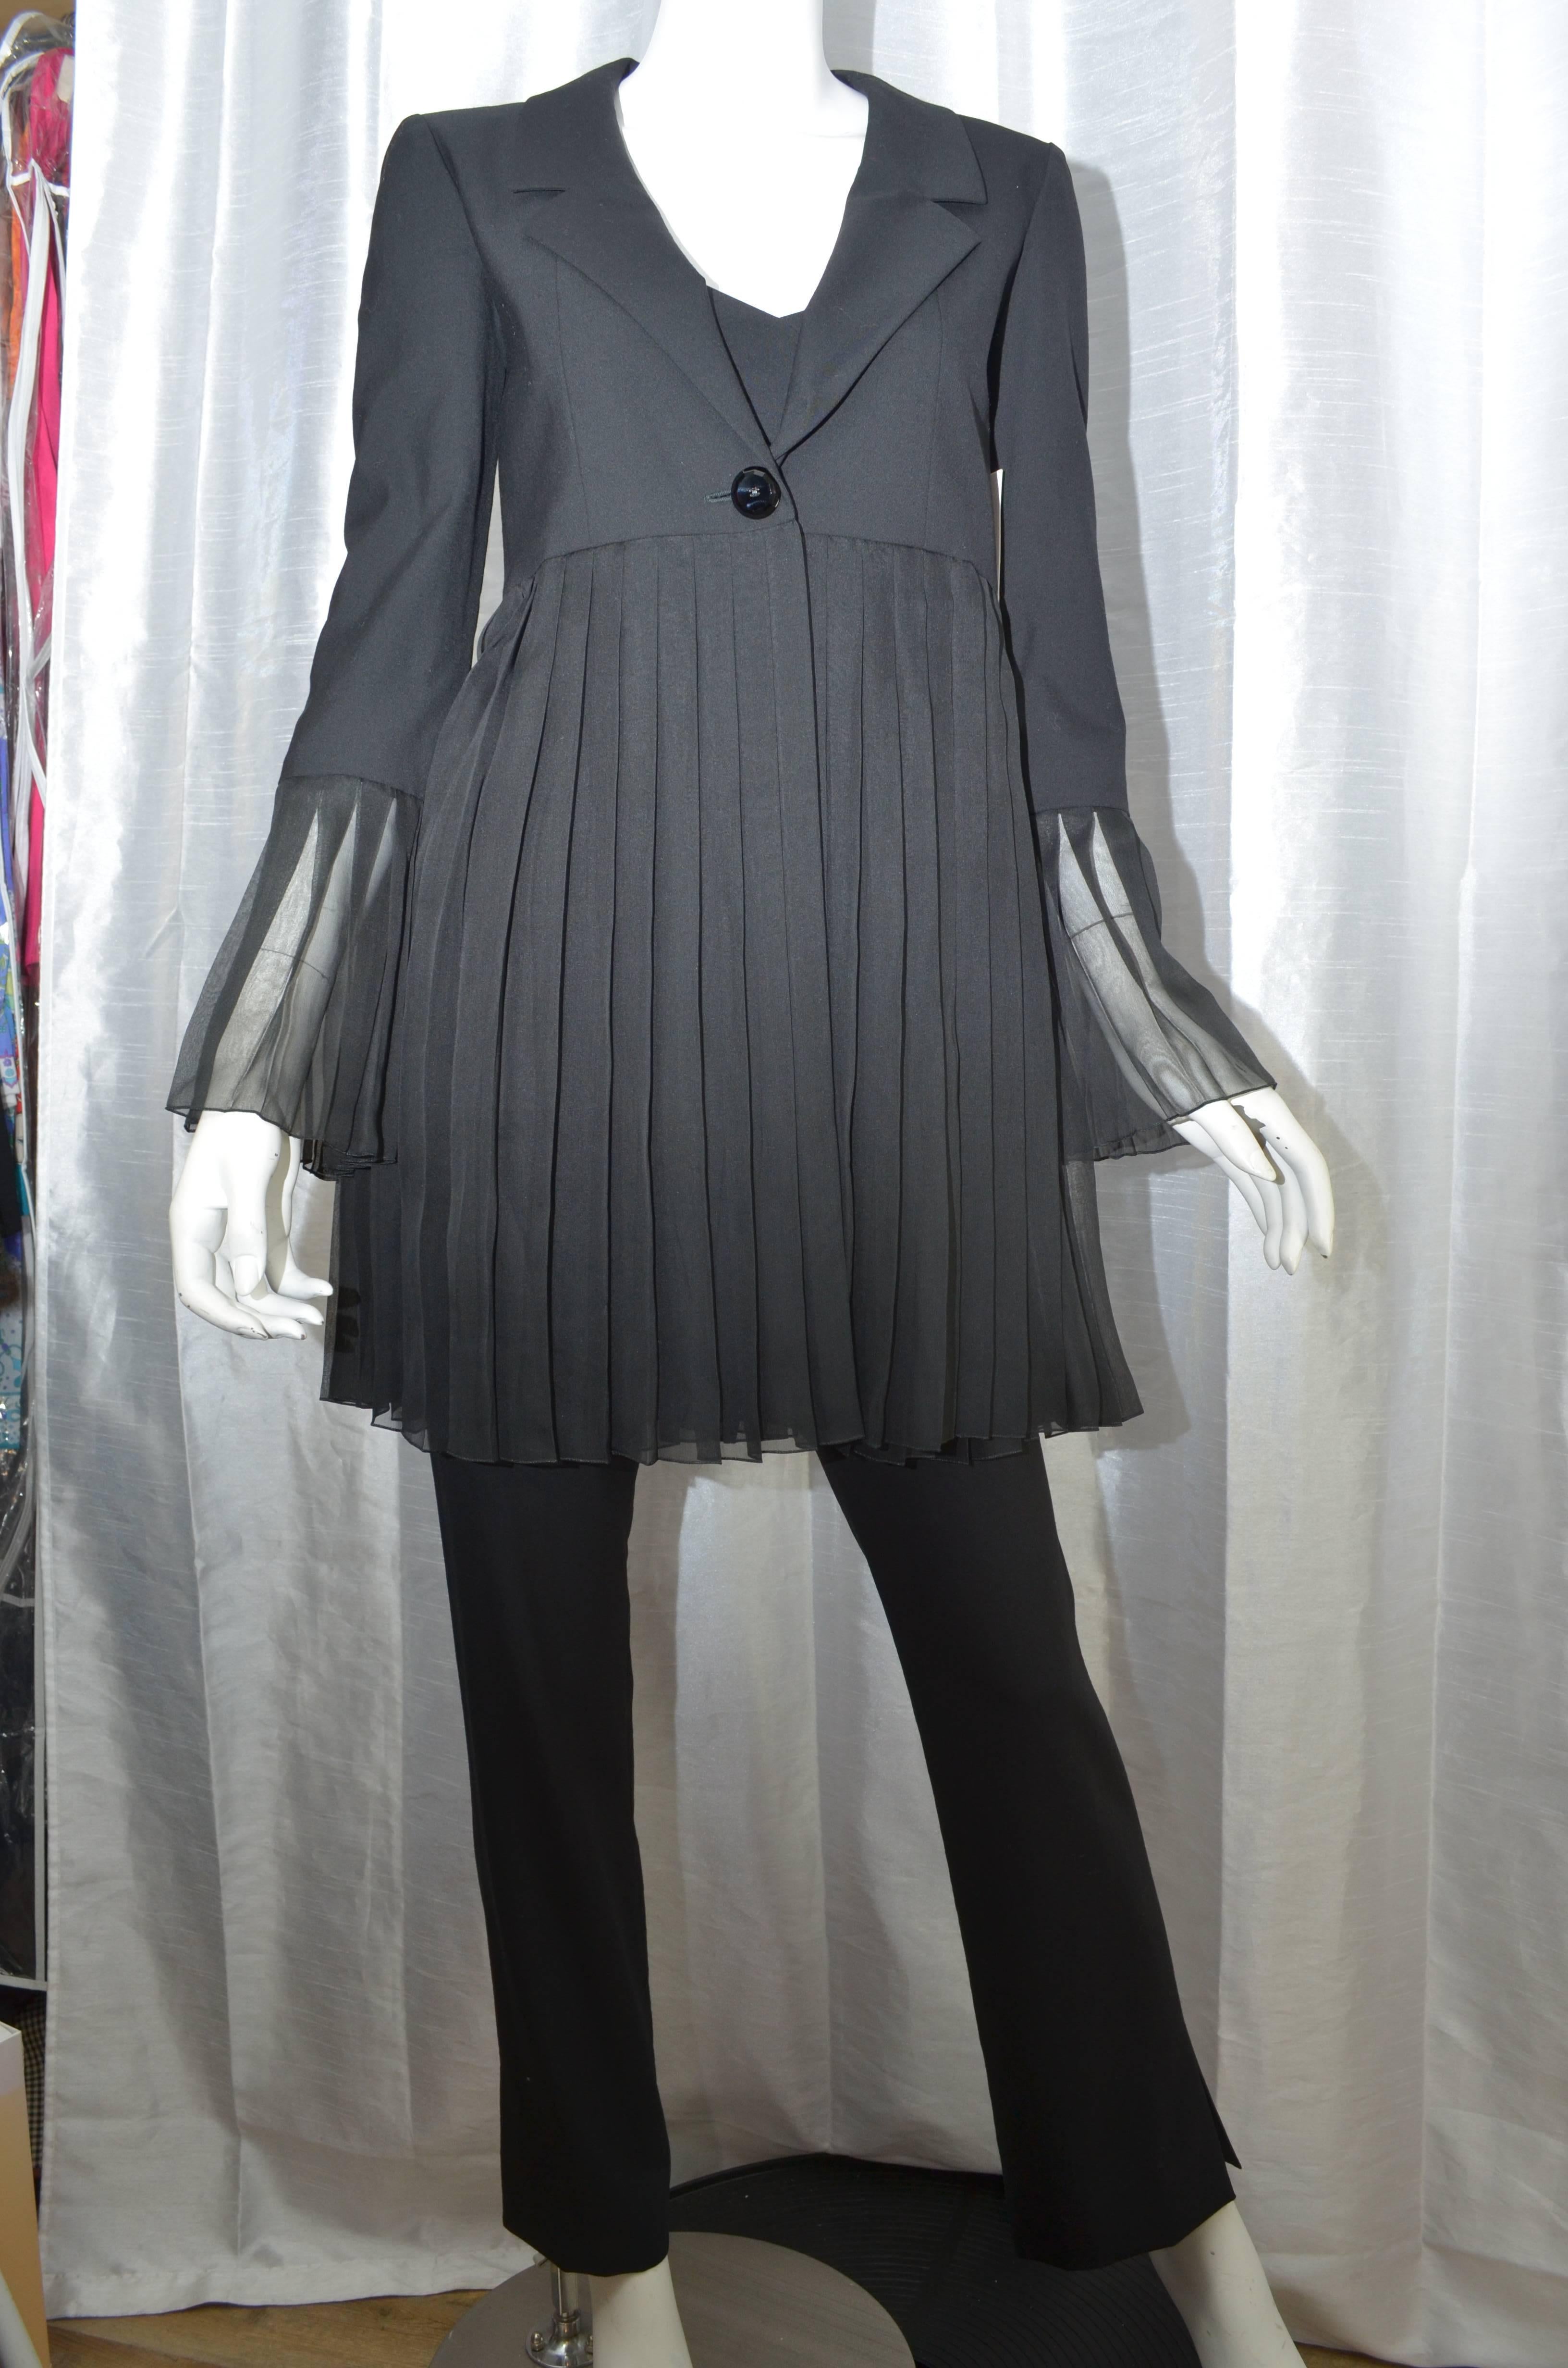 Chanel Black 3 Piece Pant Suit, Spring 2001
This set includes black pants, a partially sheer baby doll style top with spaghetti straps and a jacket with a pleated sheer bottom half. Pants are lightweight with a zipper on the side and small slits on